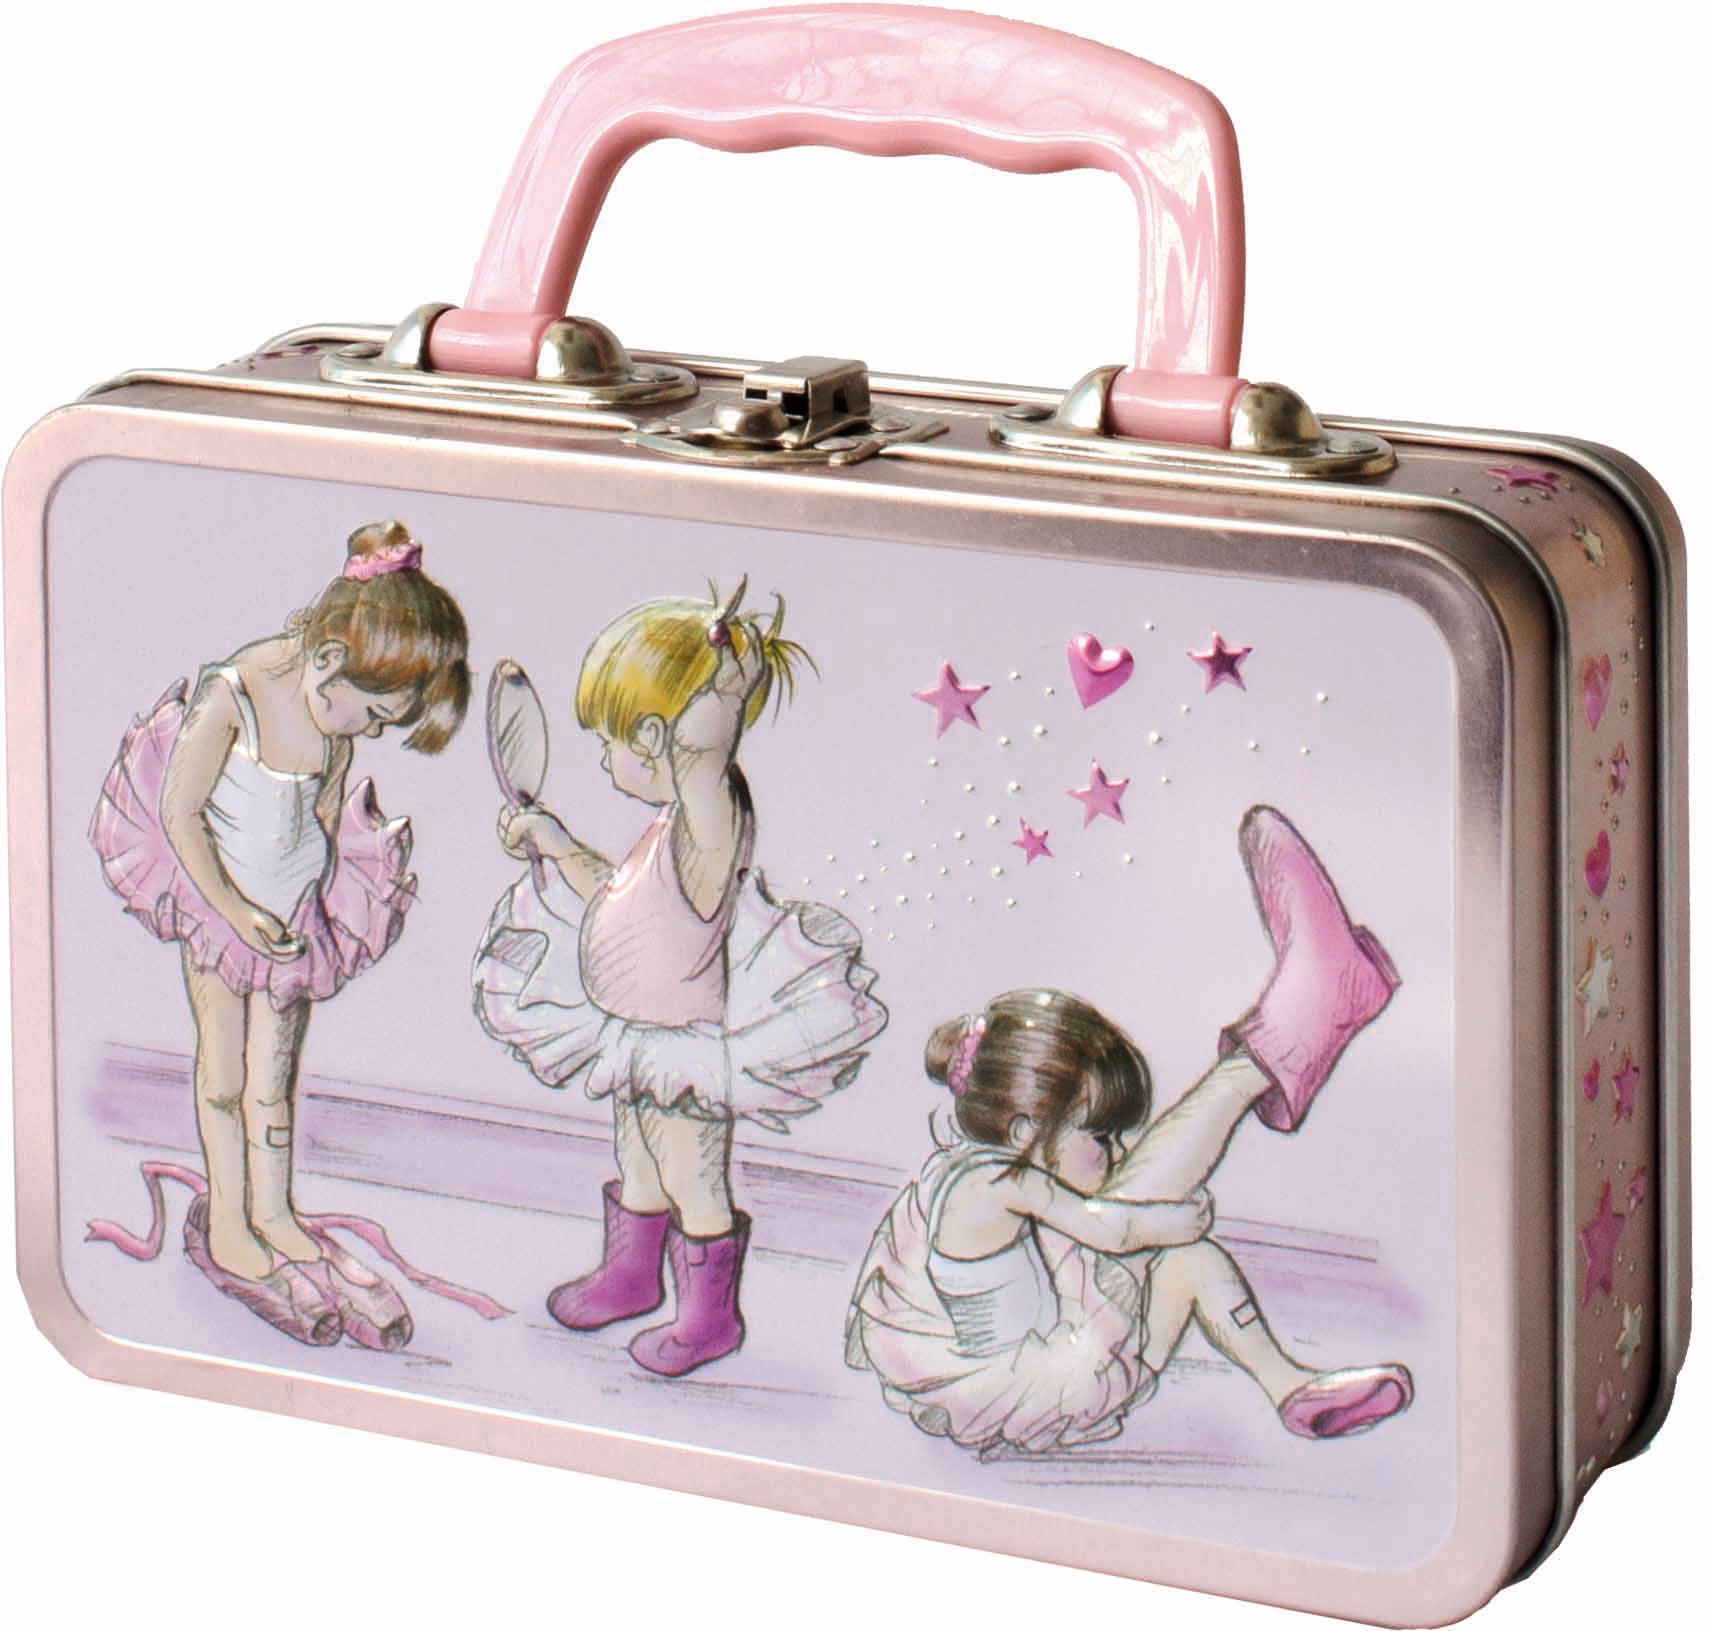 Ballerina Suitcase – 150g Mini Chocolate Chip Shortbread Biscuits – Churchills Confectionary